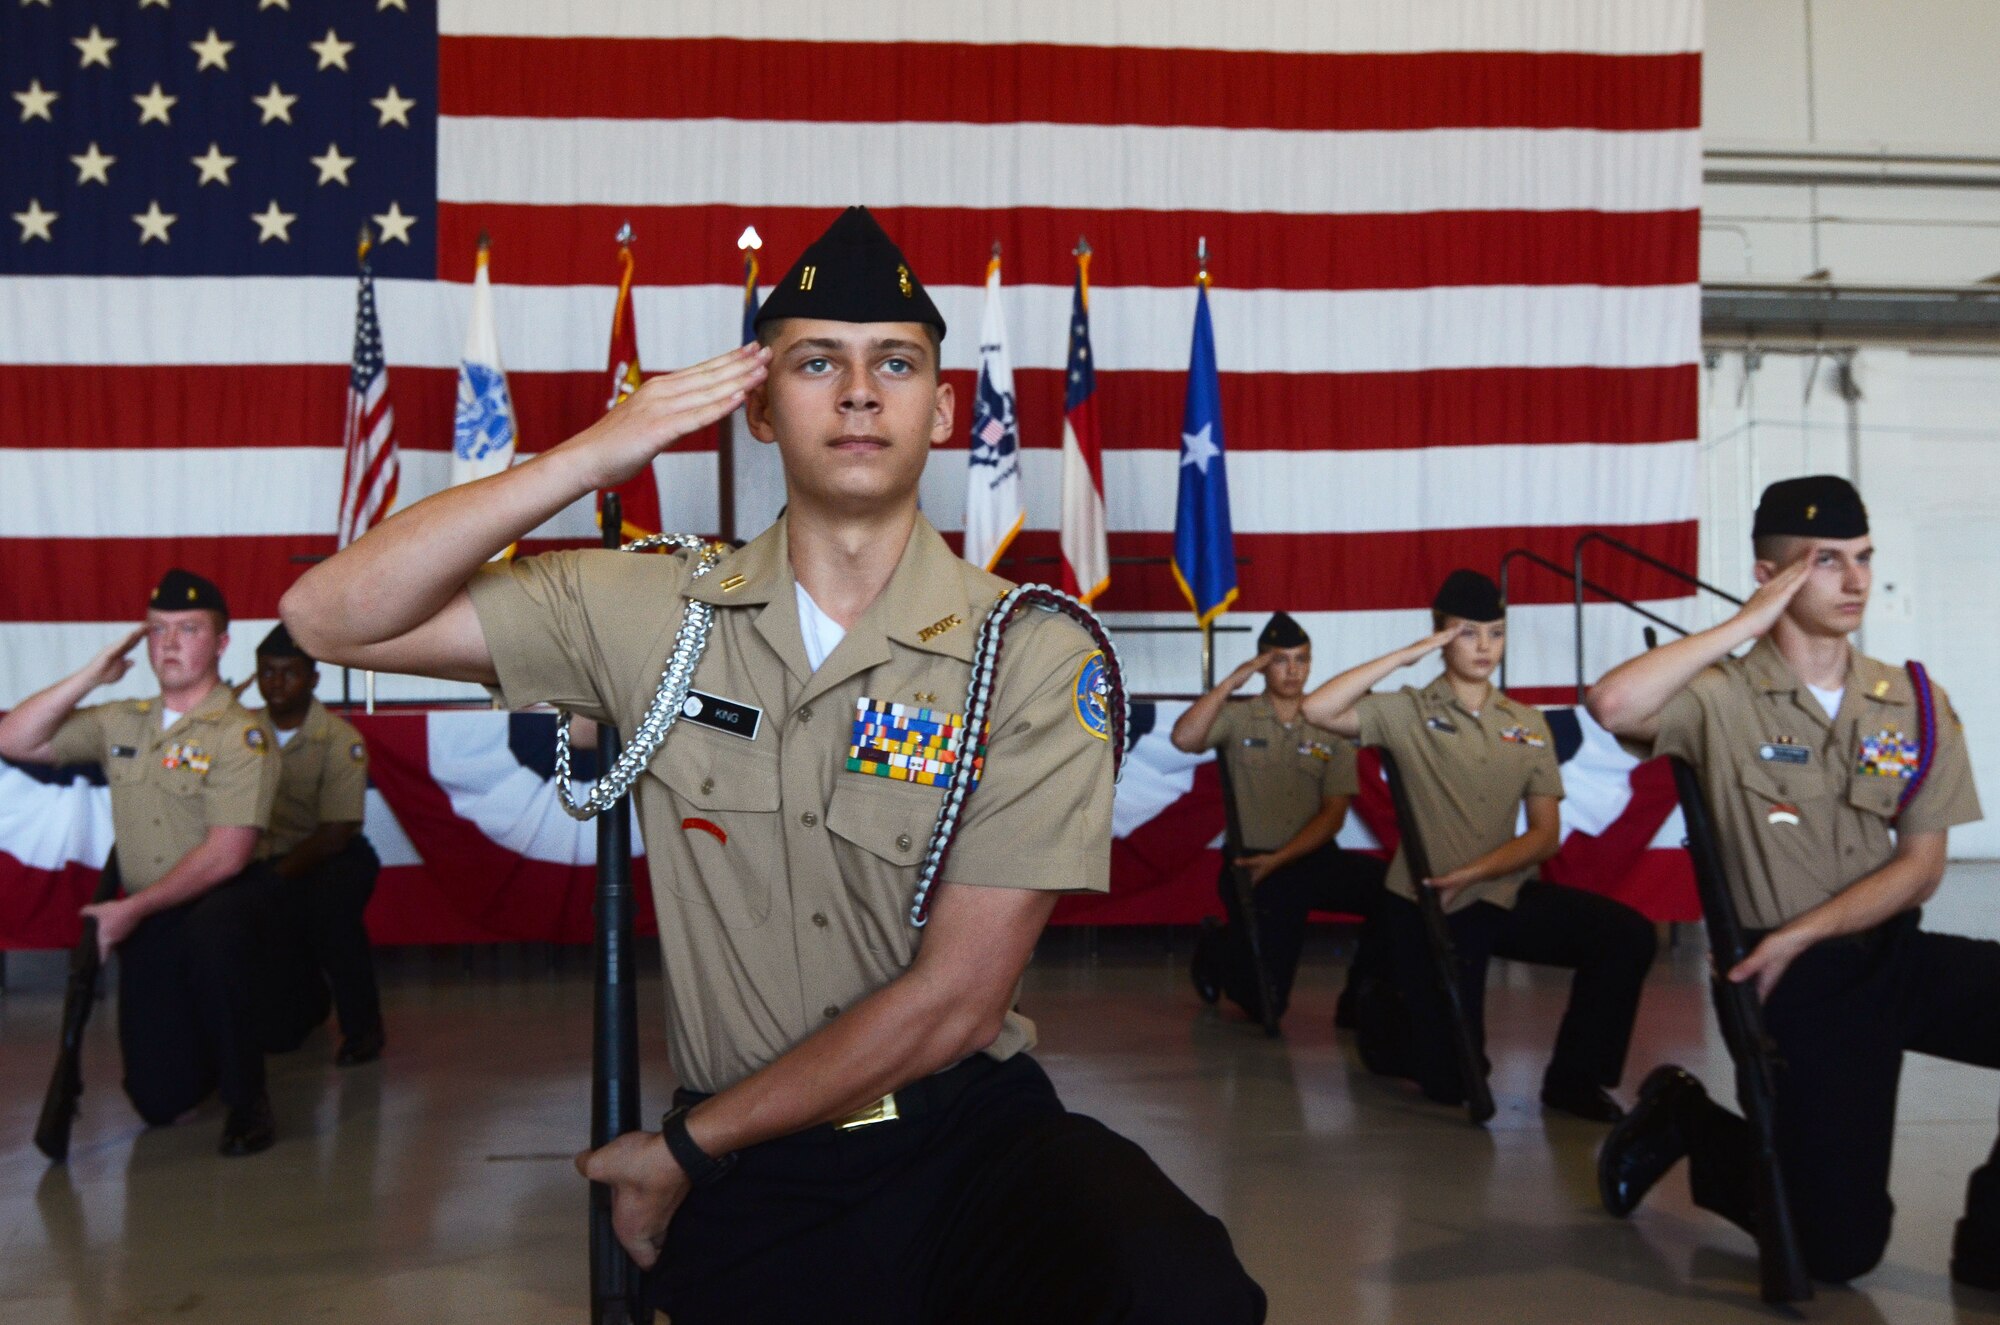 The Lassiter-Pope-Kell Navy JROTC drill team performs at this year's Academy Day, held at Dobbins Air Reserve Base, Ga. April 28, 2018. (U.S. Air Force photo/Don Peek)